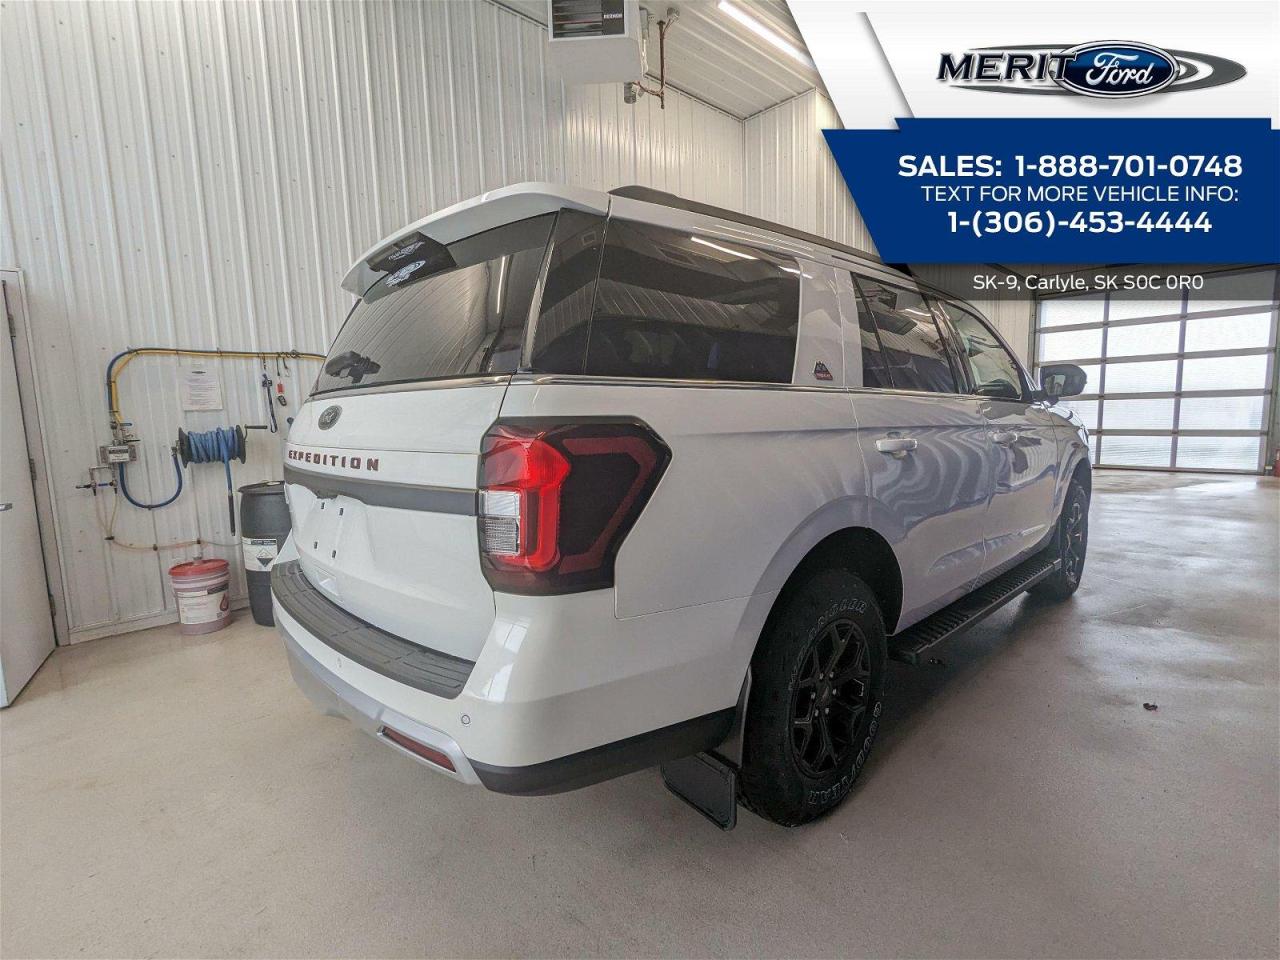 2023 Ford Expedition Timberline Model Year Sale! Photo5